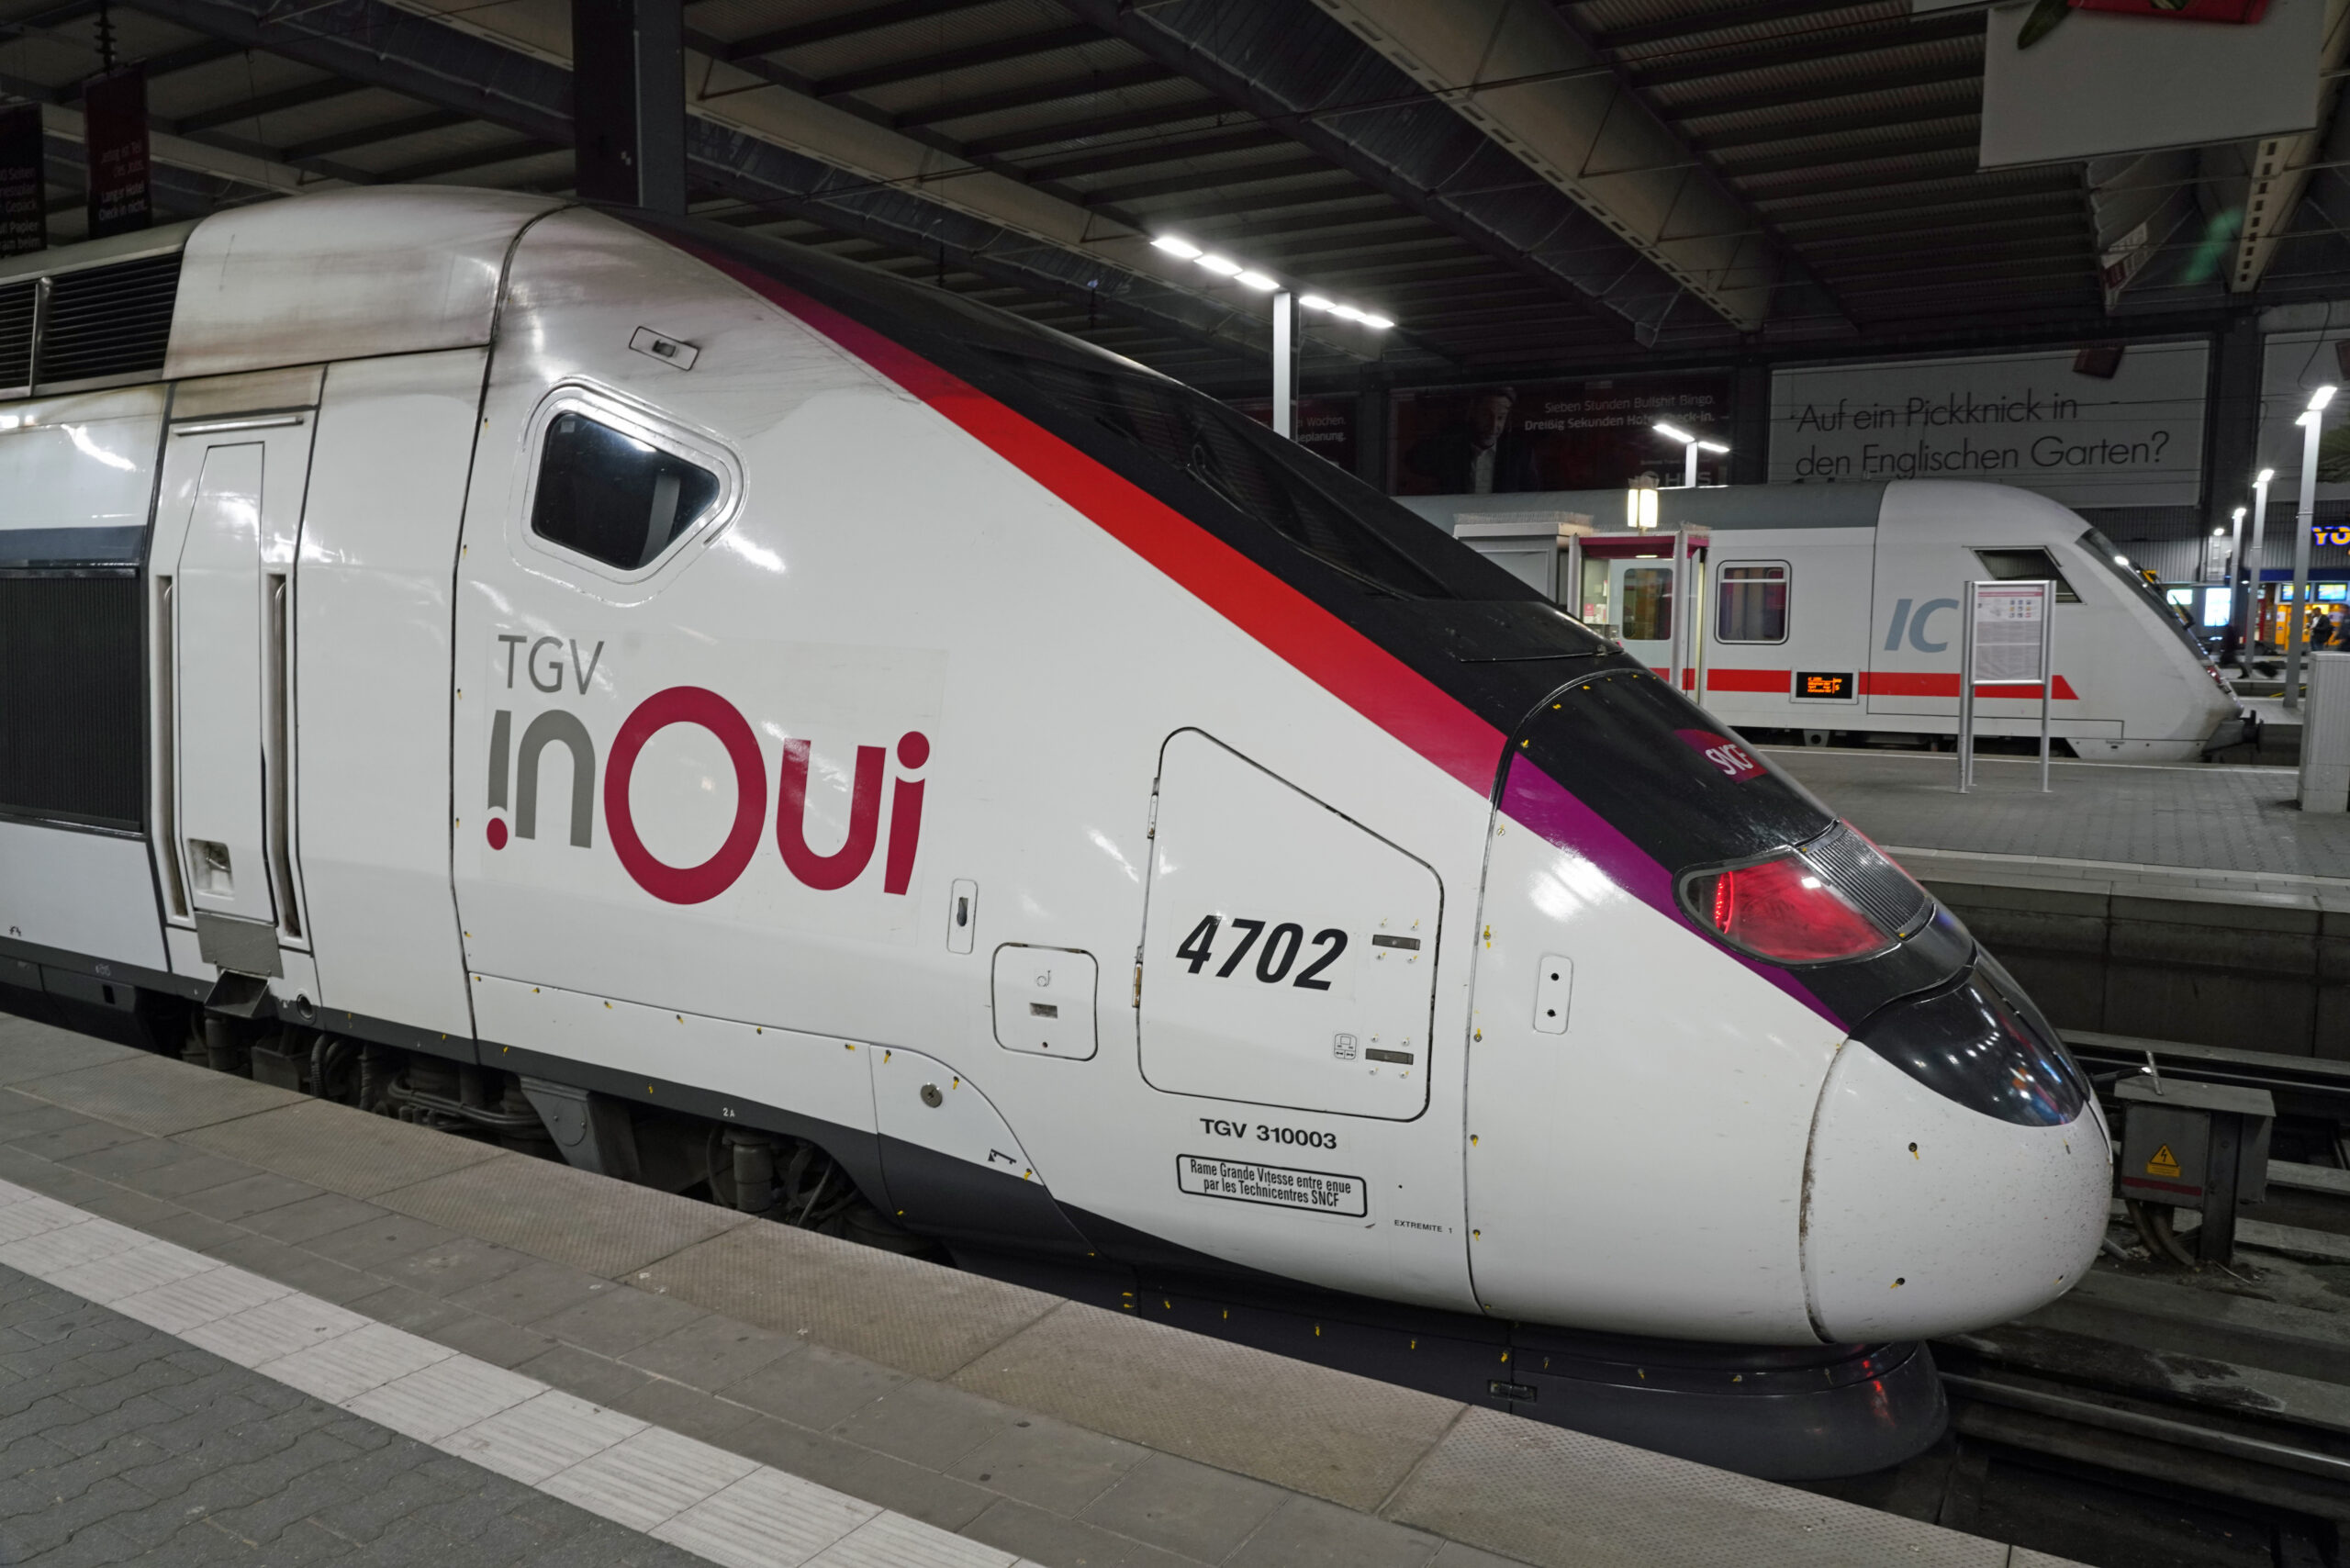 Alleo – DB / SNCF co-operation that runs services between Germany and France